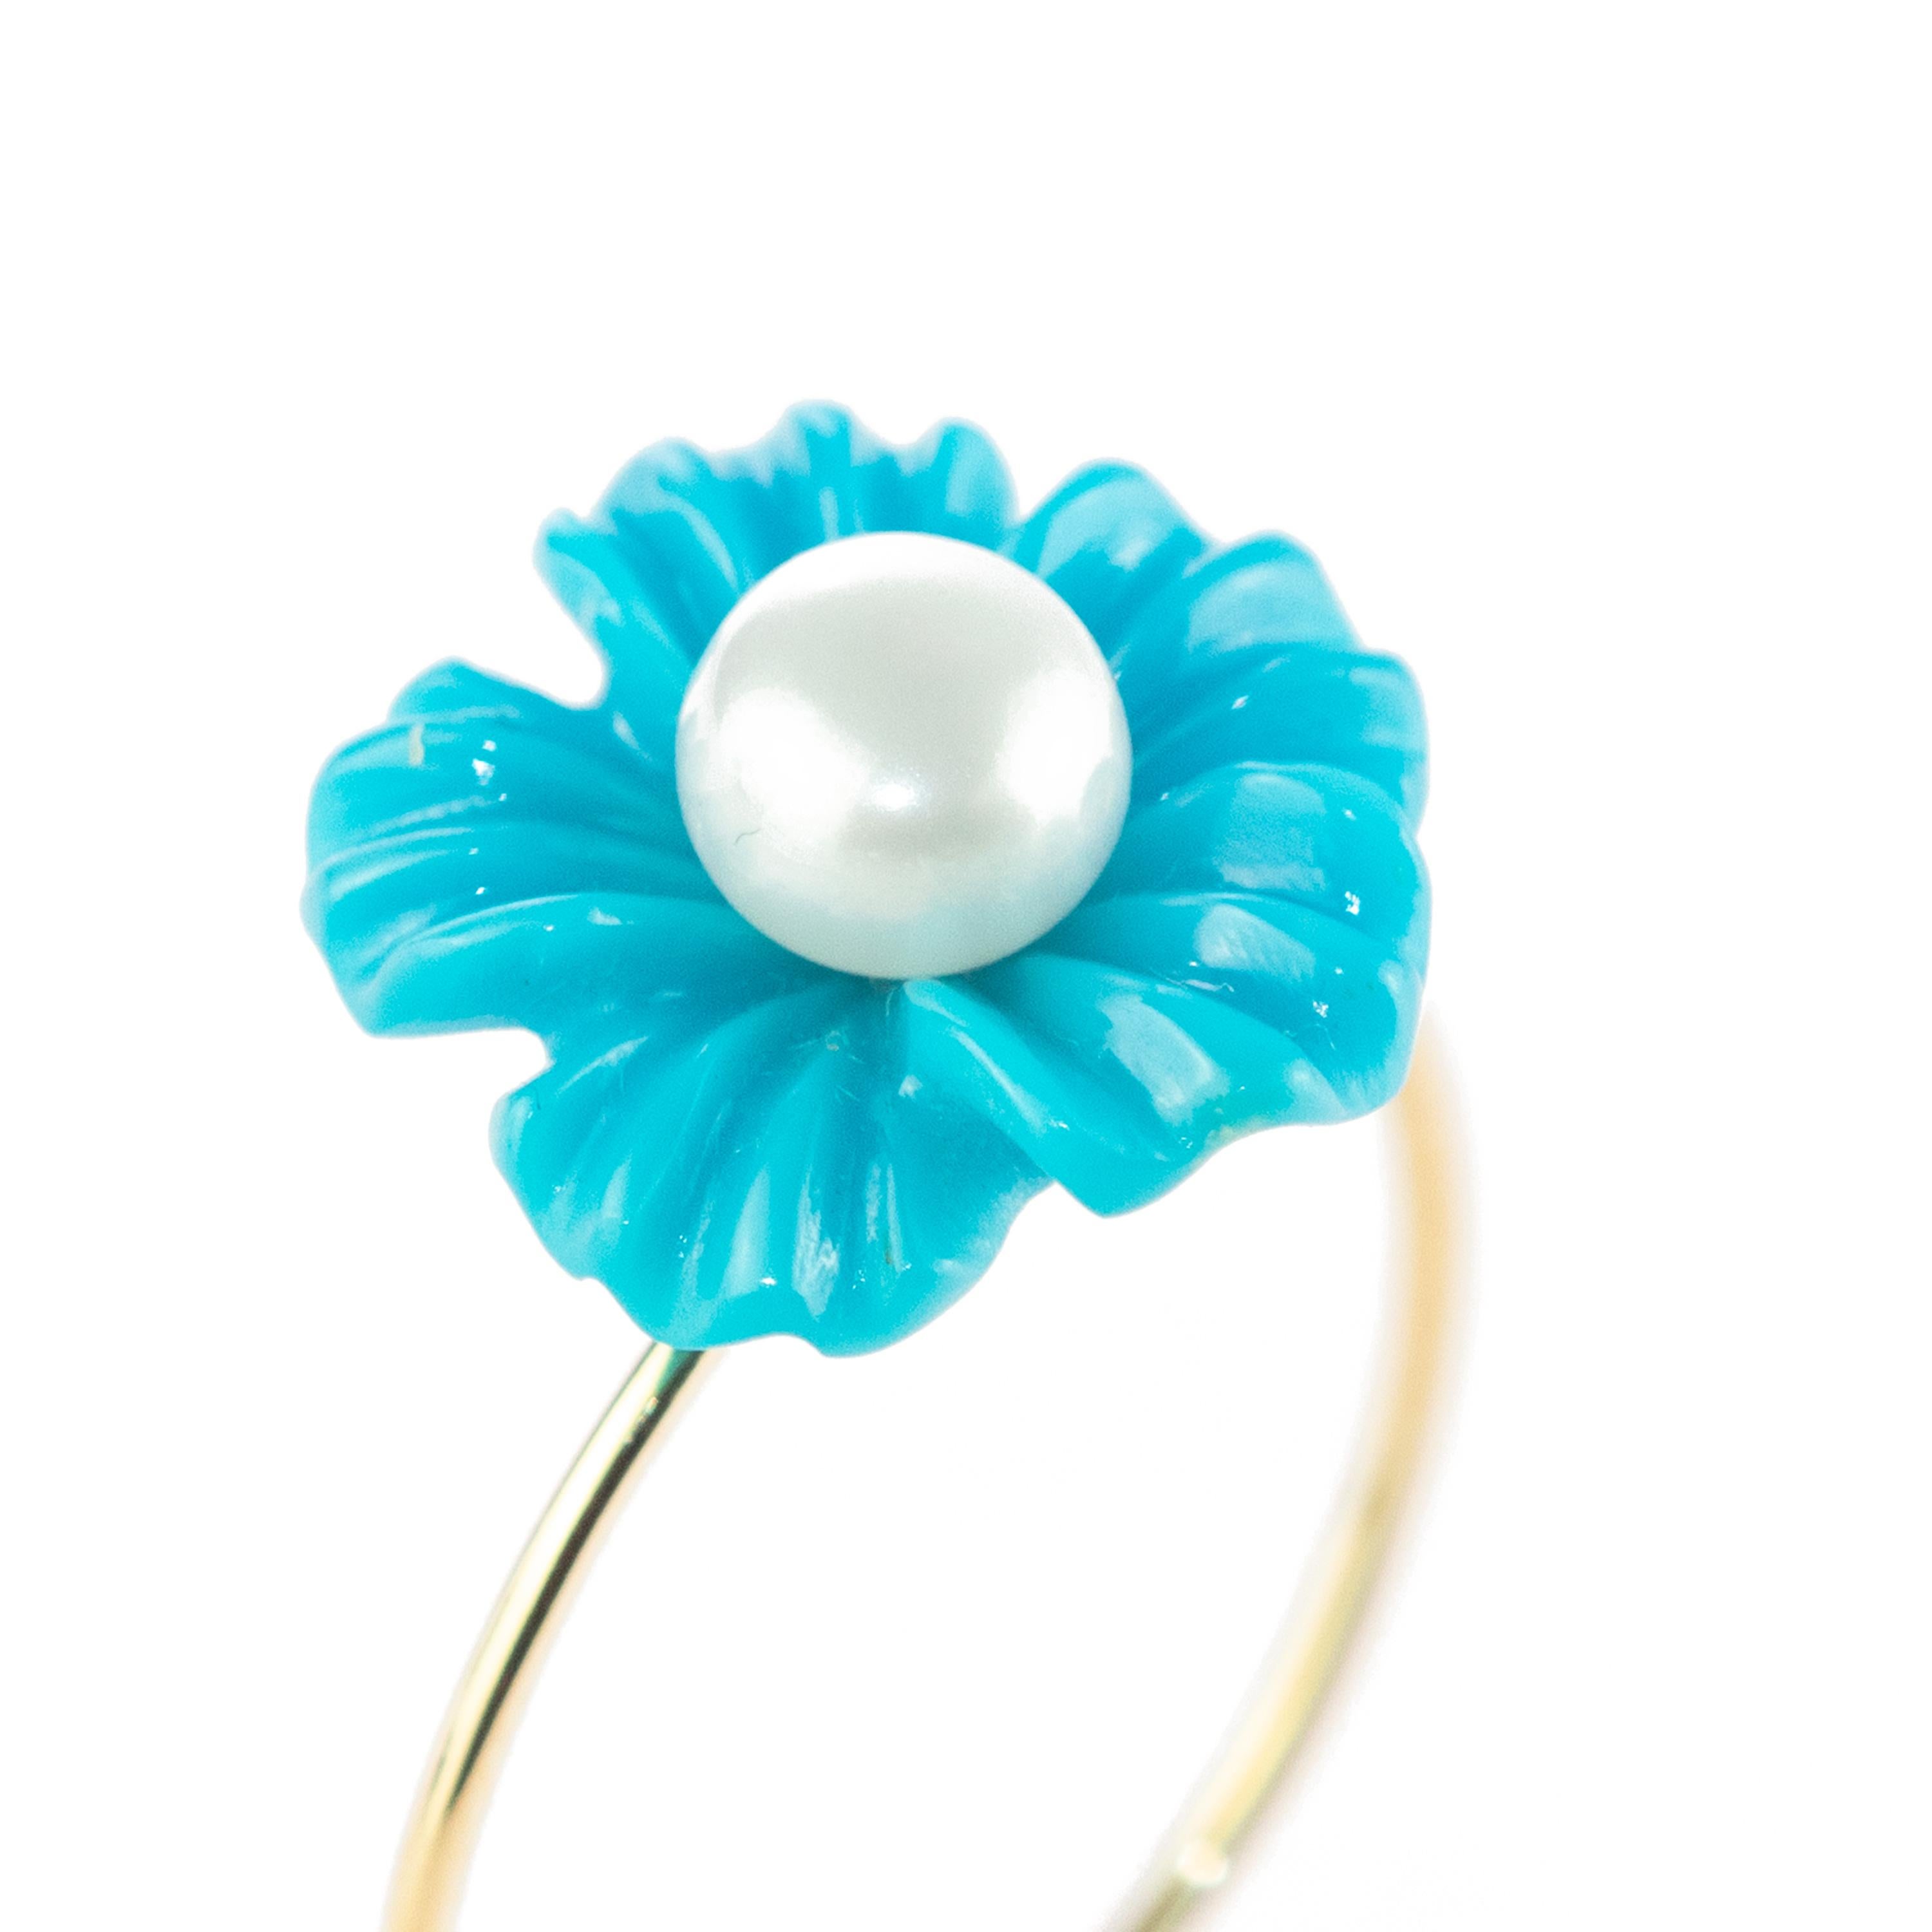 Astonishing natural turquoise flower ring with a central 1 carat freshwater pearl. Carved and chic petals that evoke the italian handmade traditional jewelry work. Girls delicate ring

Beautiful and delicate design that evokes the roots of beauty